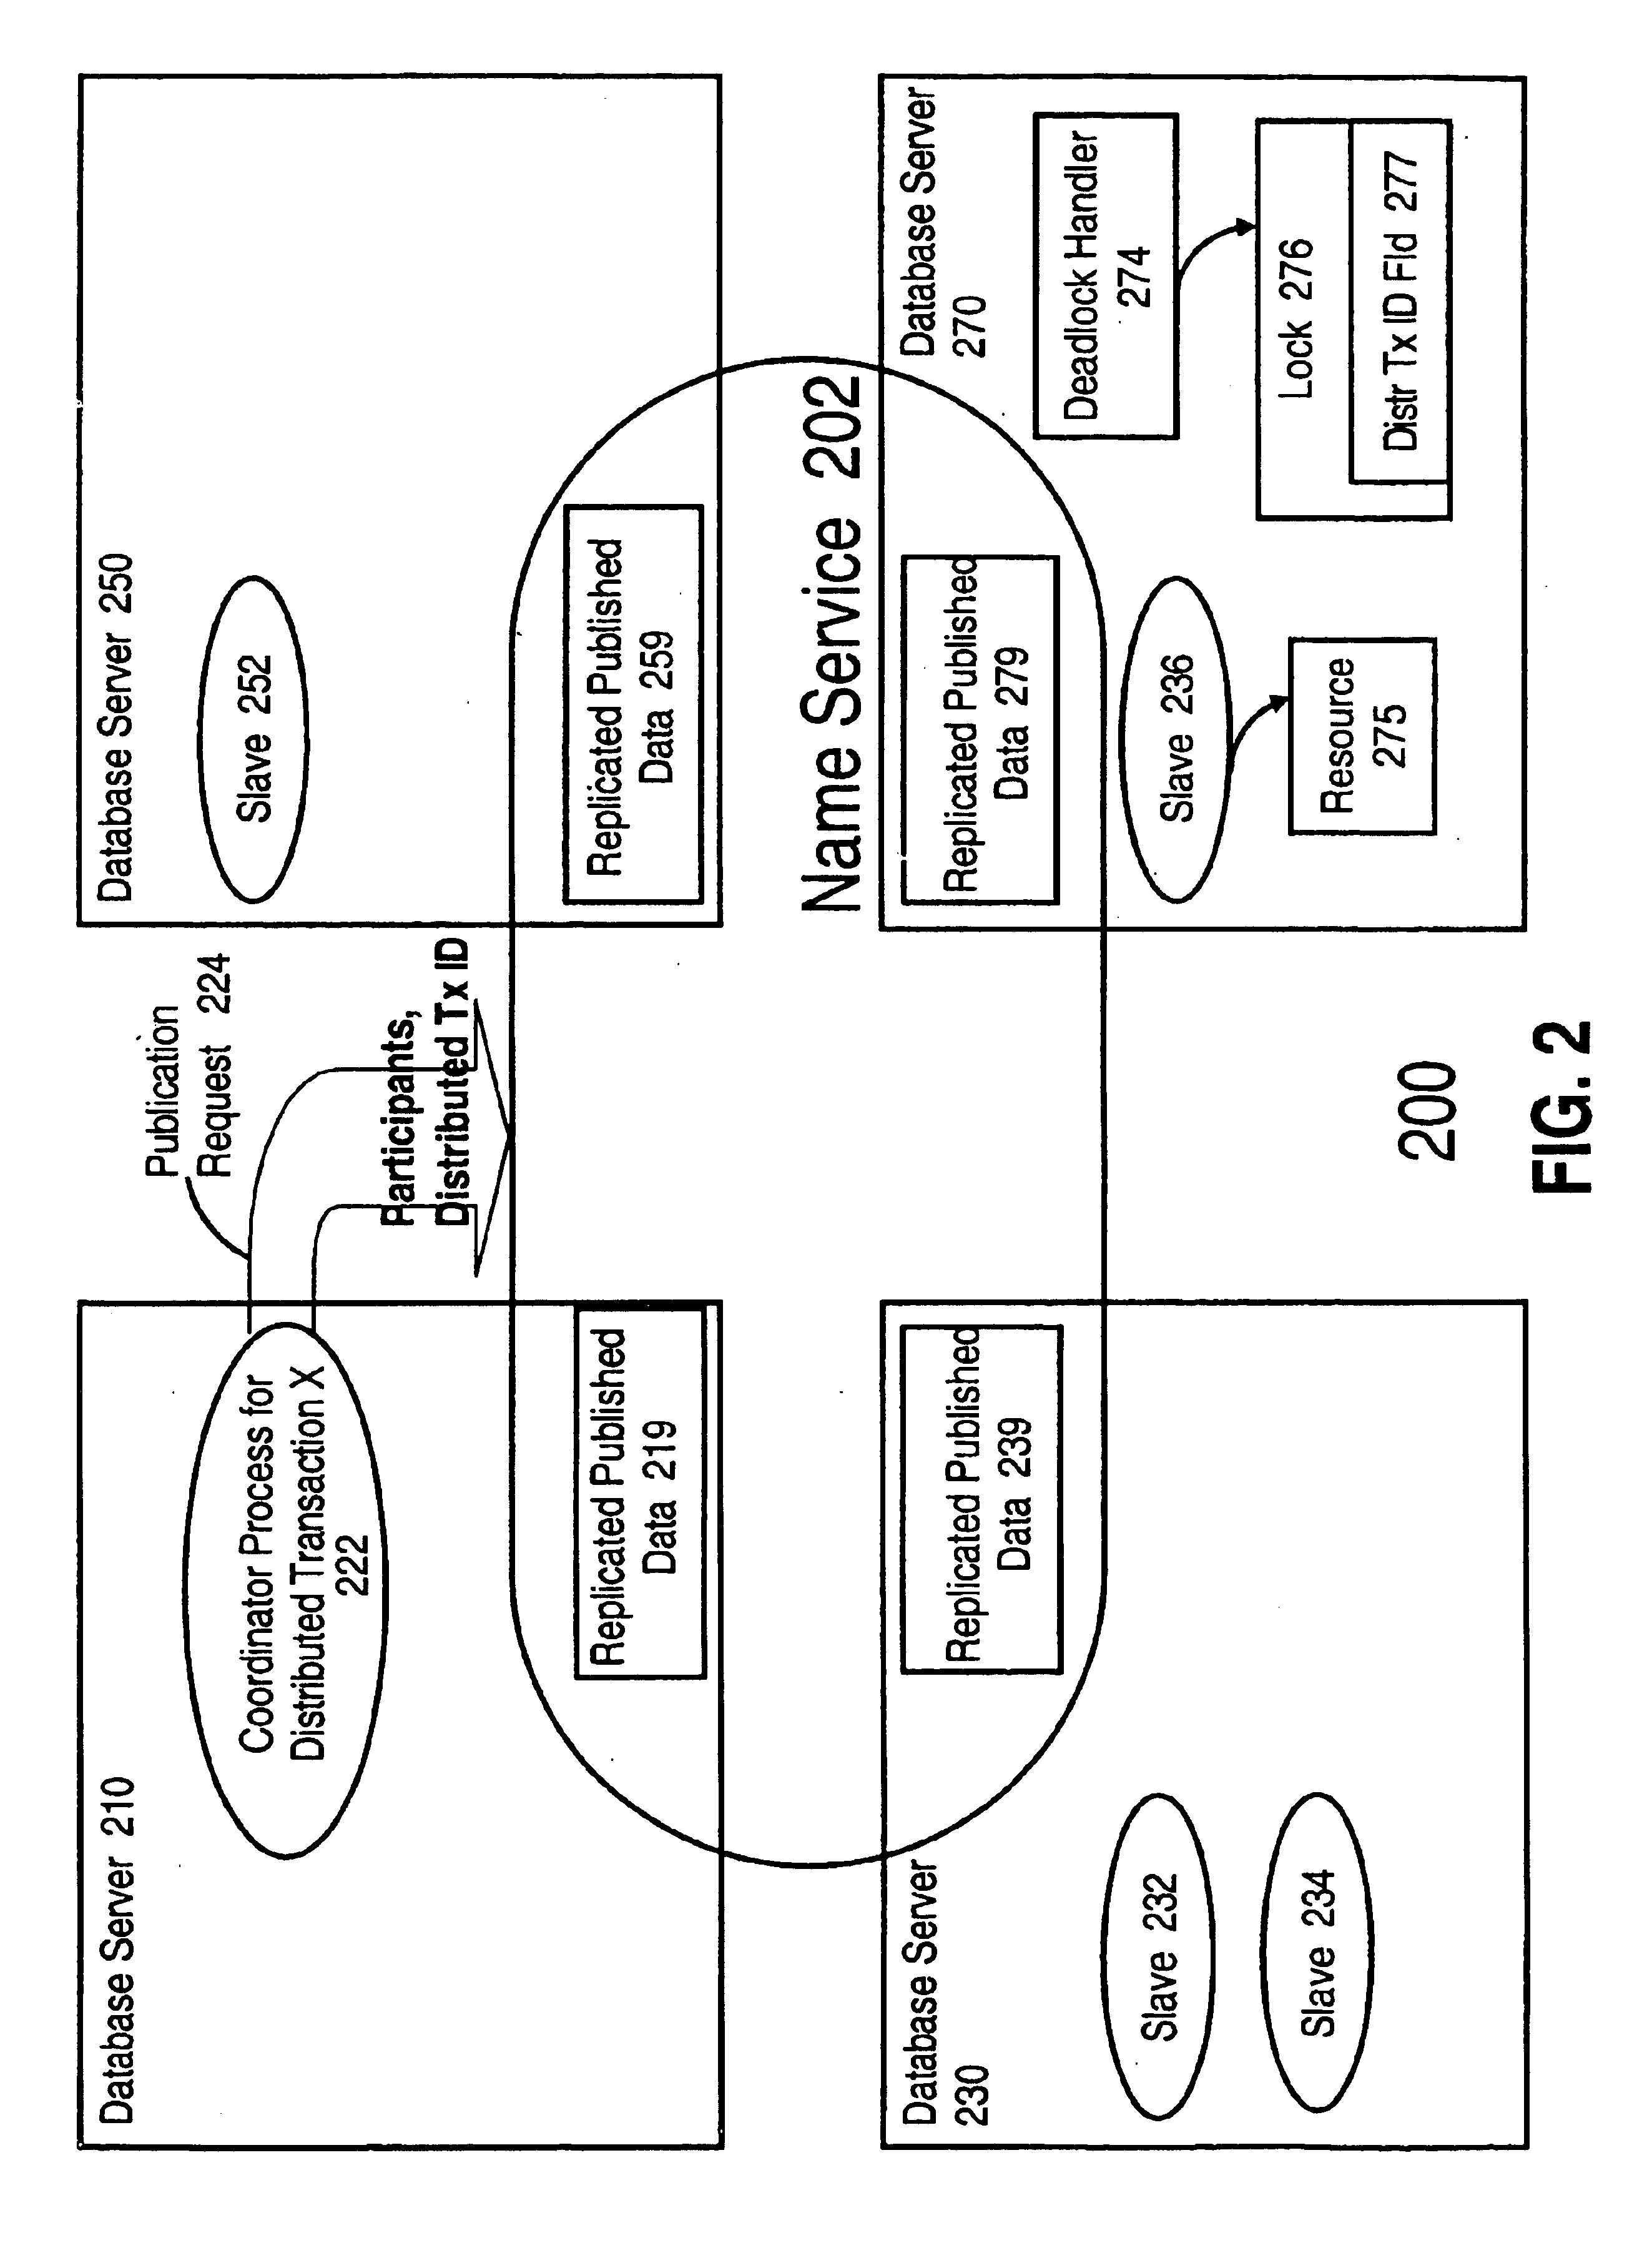 Determining and registering participants in a distributed transaction in response to commencing participation in said distributed transaction